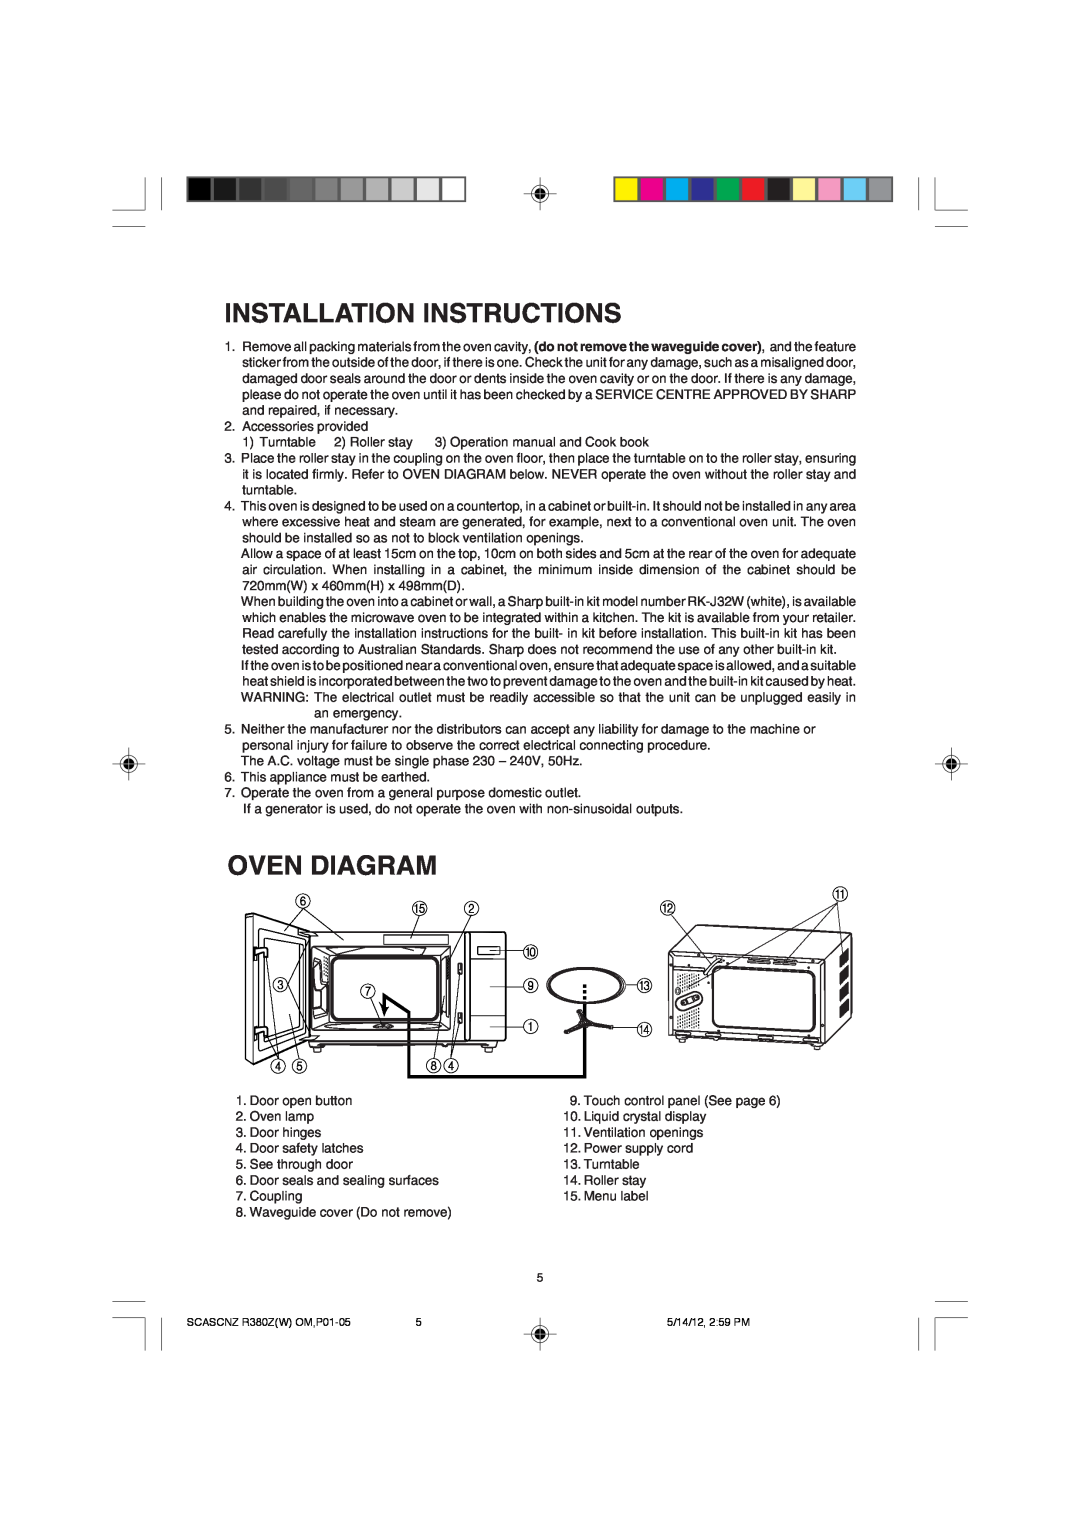 Sharp R-380Z(W) operation manual Installation Instructions, Oven Diagram, 9 C 1 D 